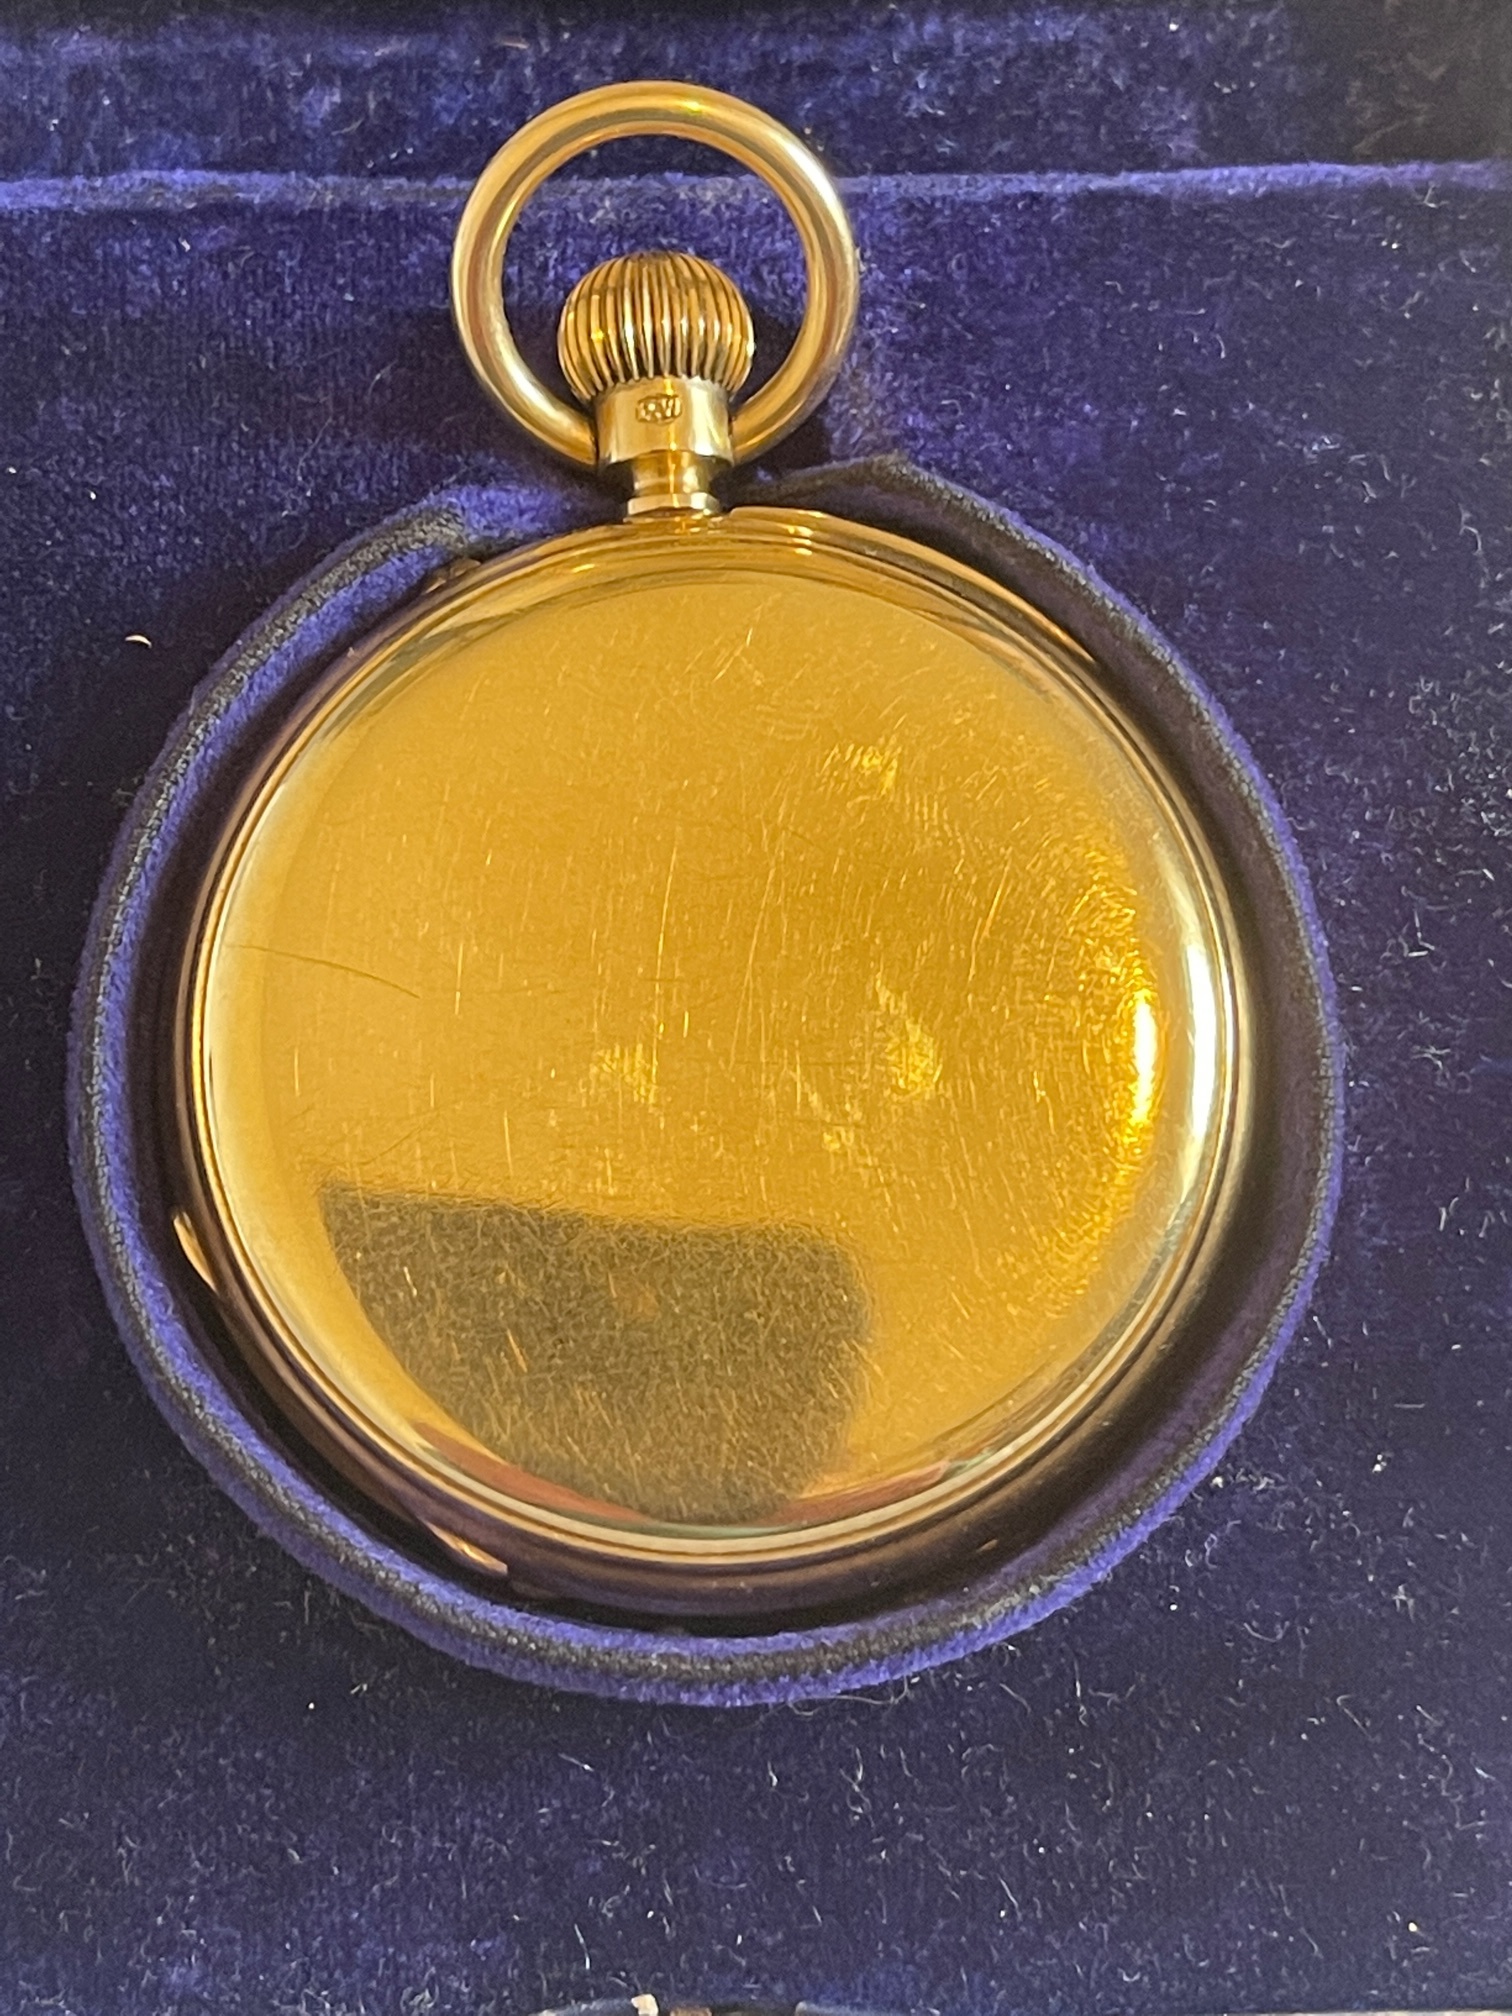 Antique Hunt&Roskell 18ct Gold Full Hunter Pocket Watch-working with Cameron Highlanders Inscription - Image 5 of 9